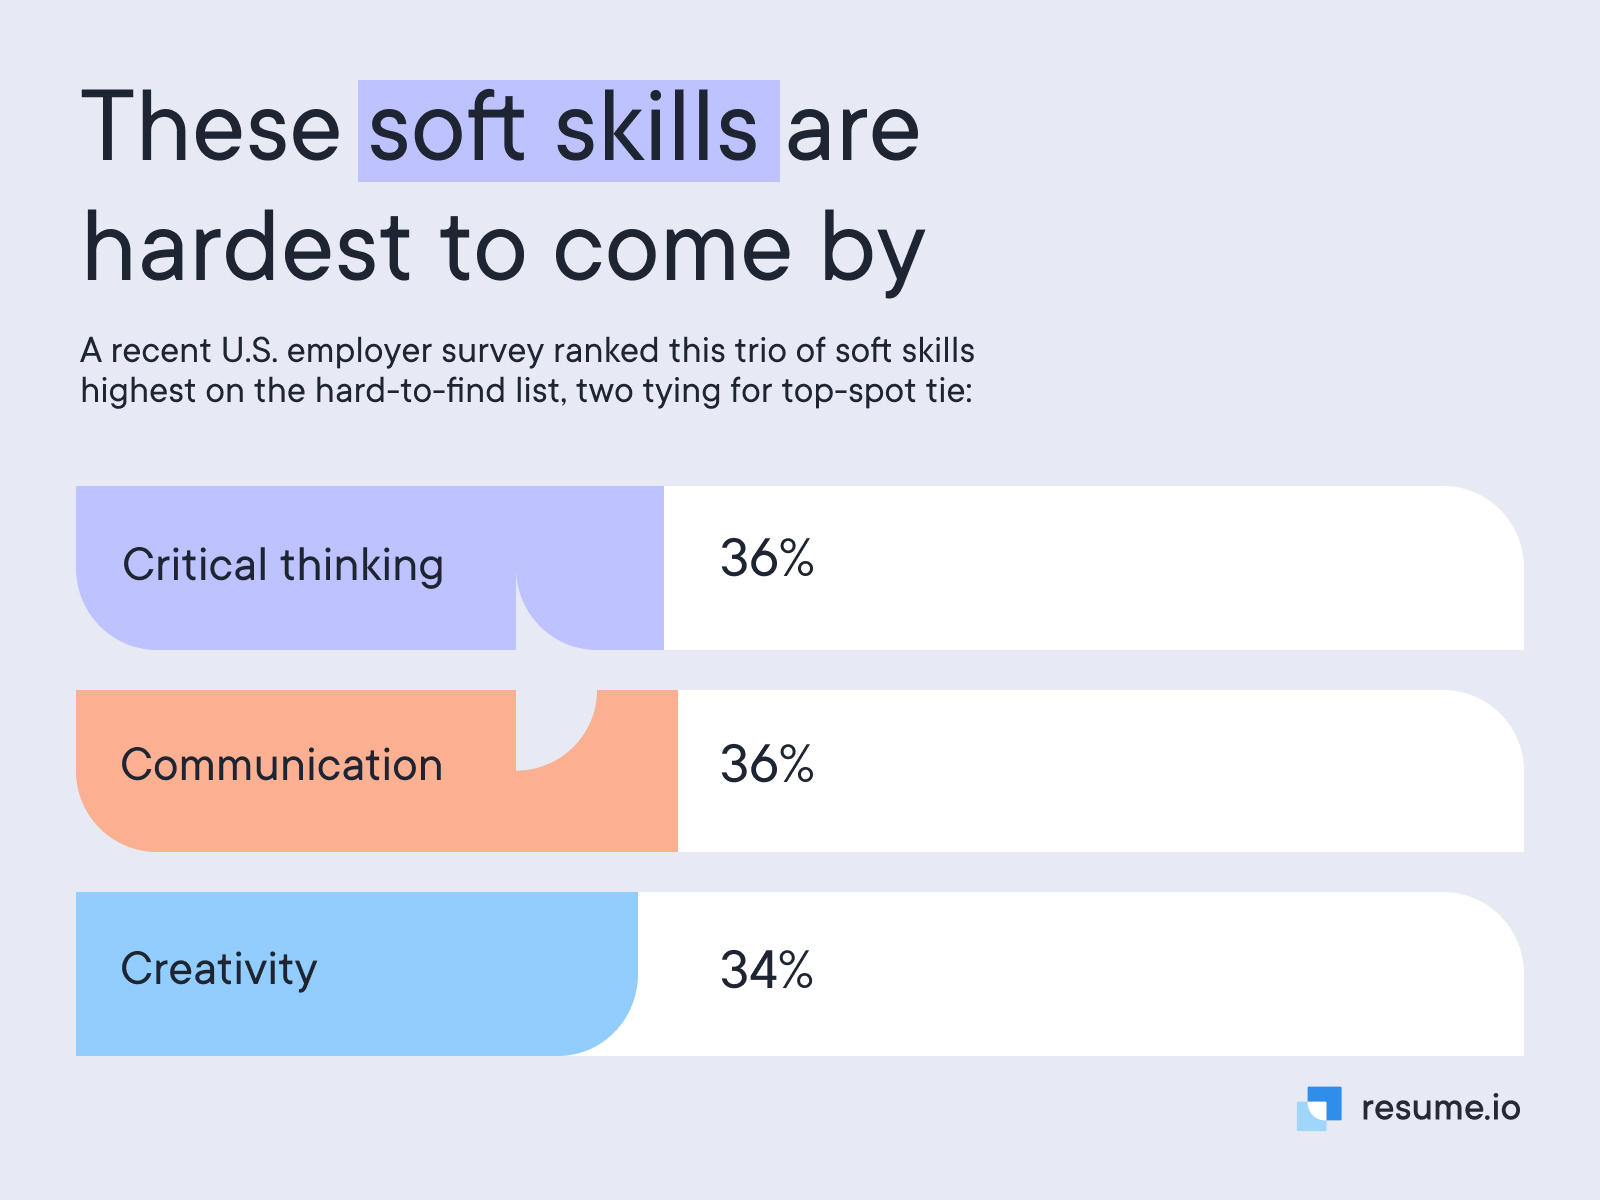 These soft skills are hardest to come by